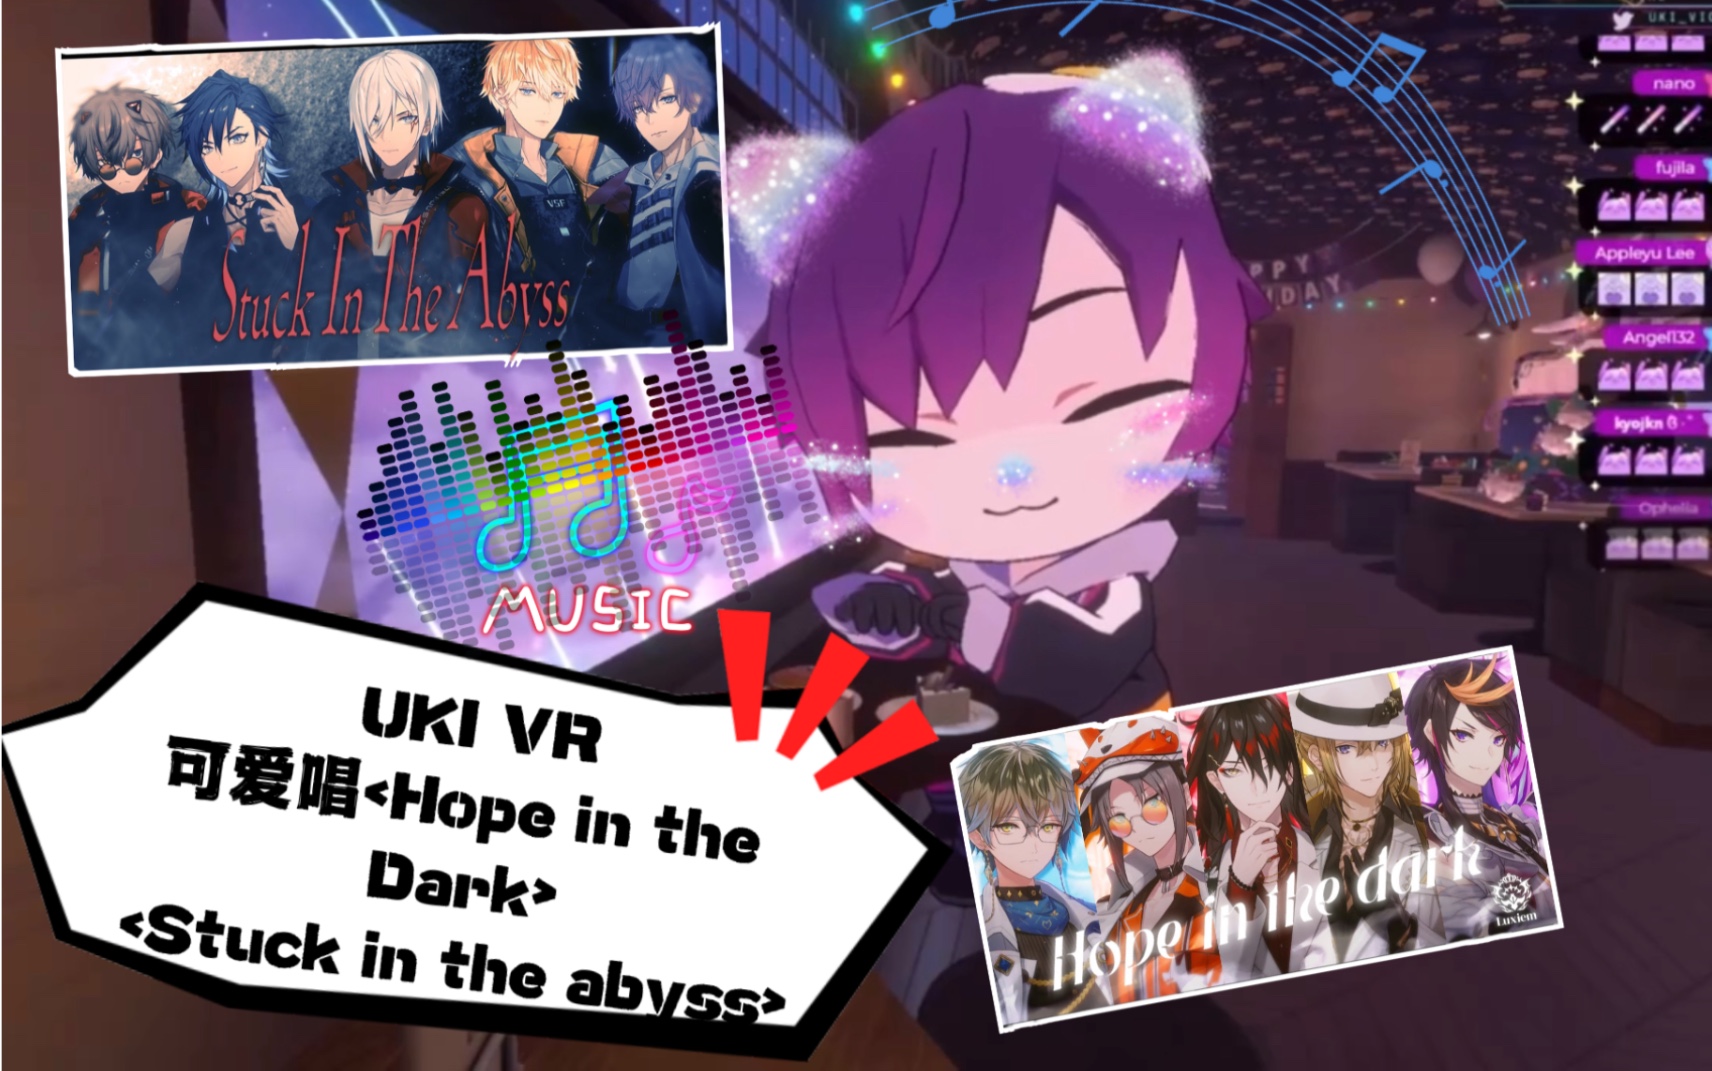 【Uki Violeta】 VR Chat 唱歌（Hope in the Dark,Stuck in the Abyss)